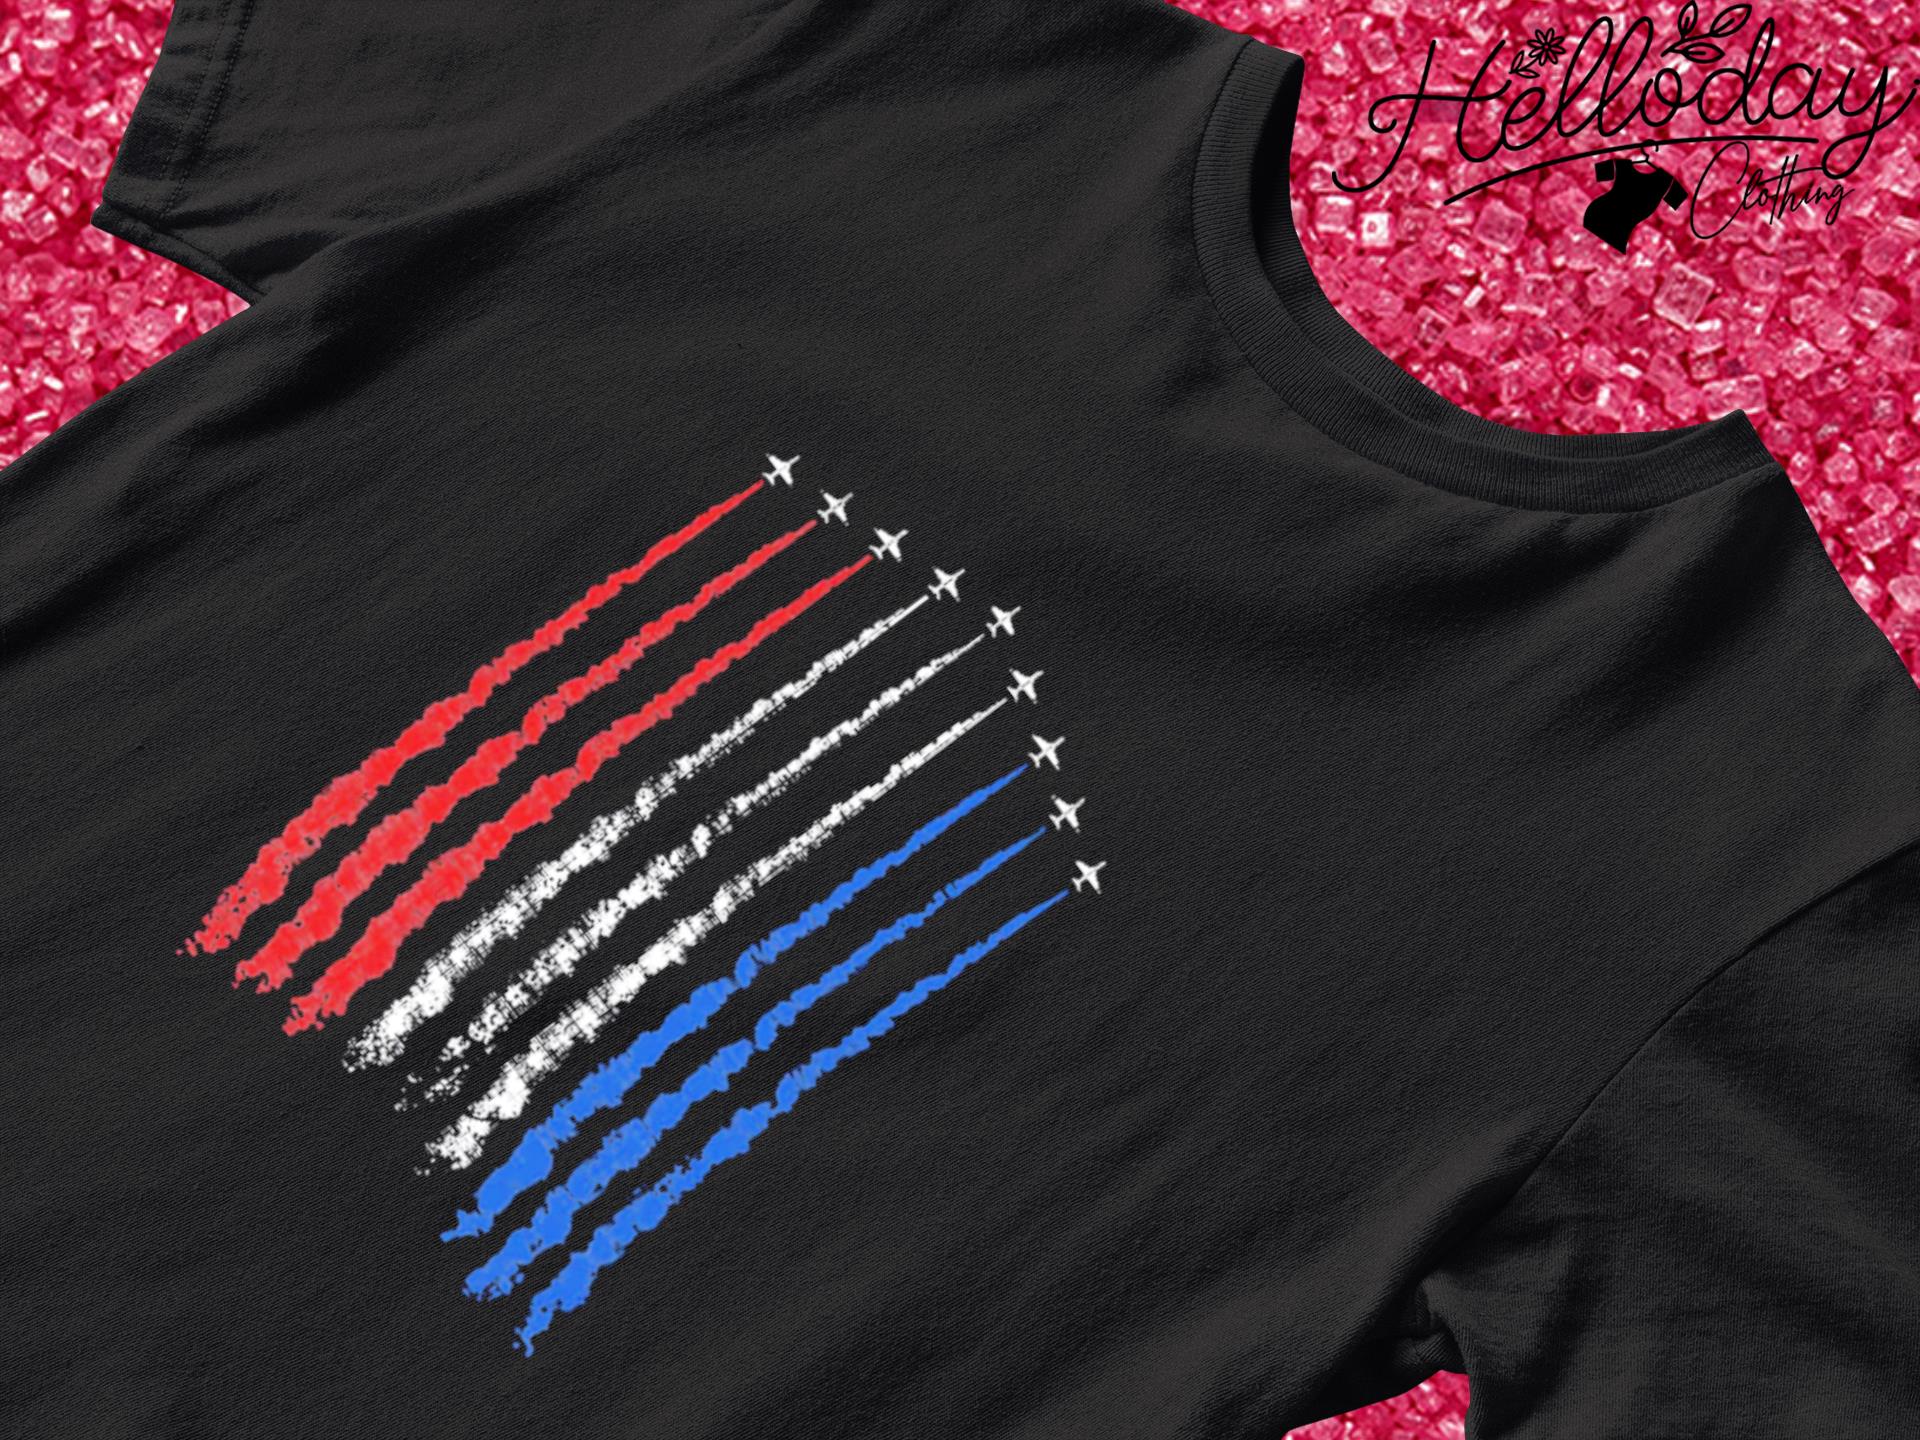 Red white blue air force flyover shirt